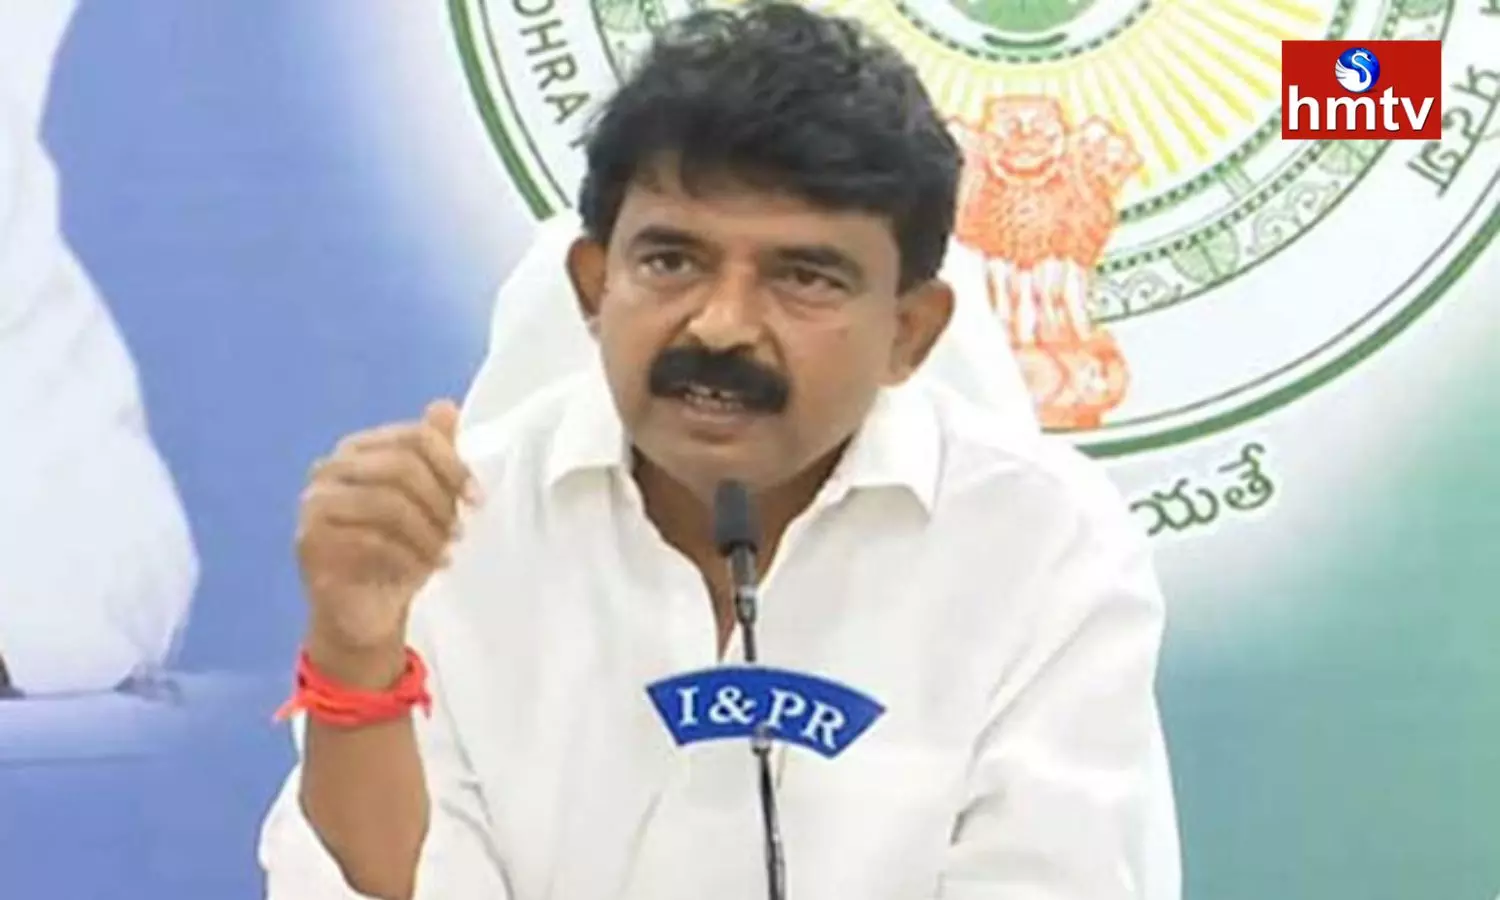 Kotamreddy it is not phone tapping